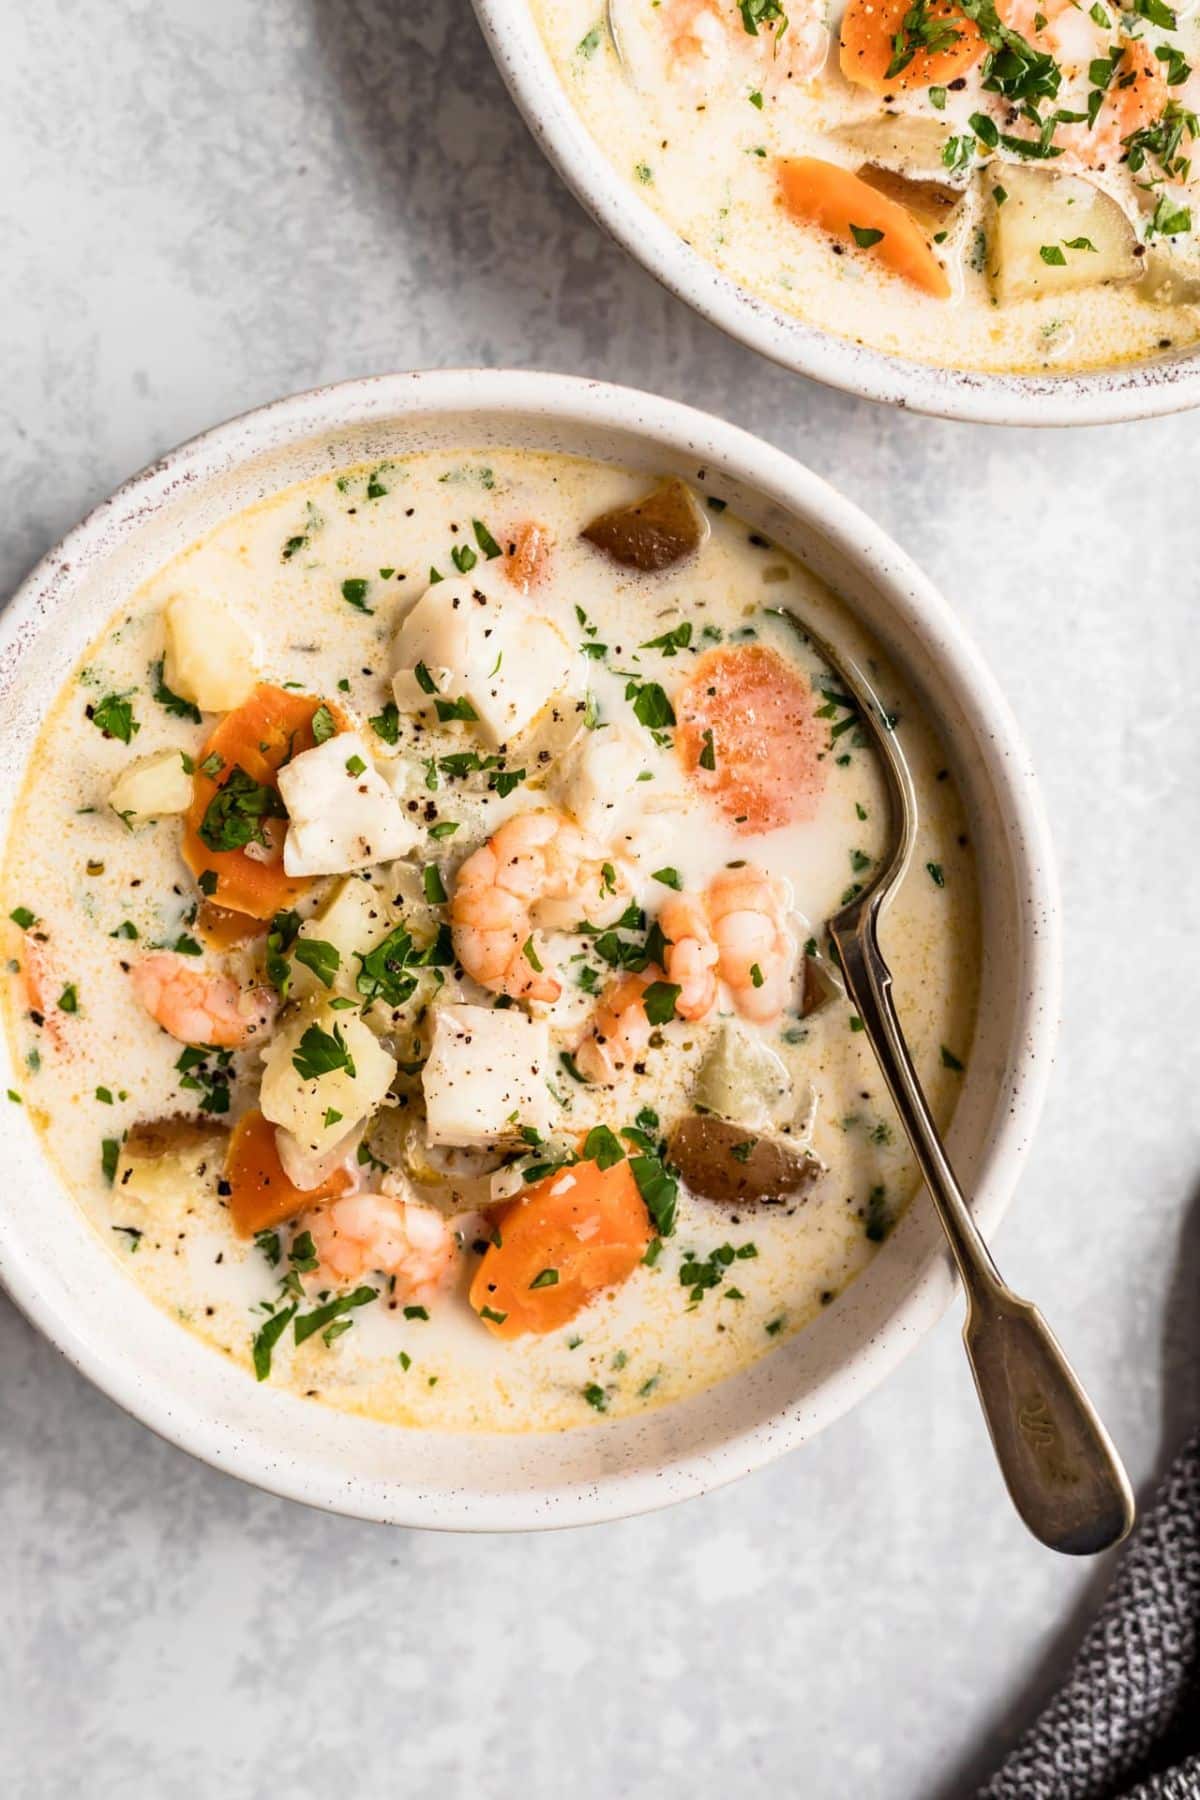 Healthy Seafood Chowder in a round white bowl with a spoon - one of the recipes for this week's healthy weekly meal plan